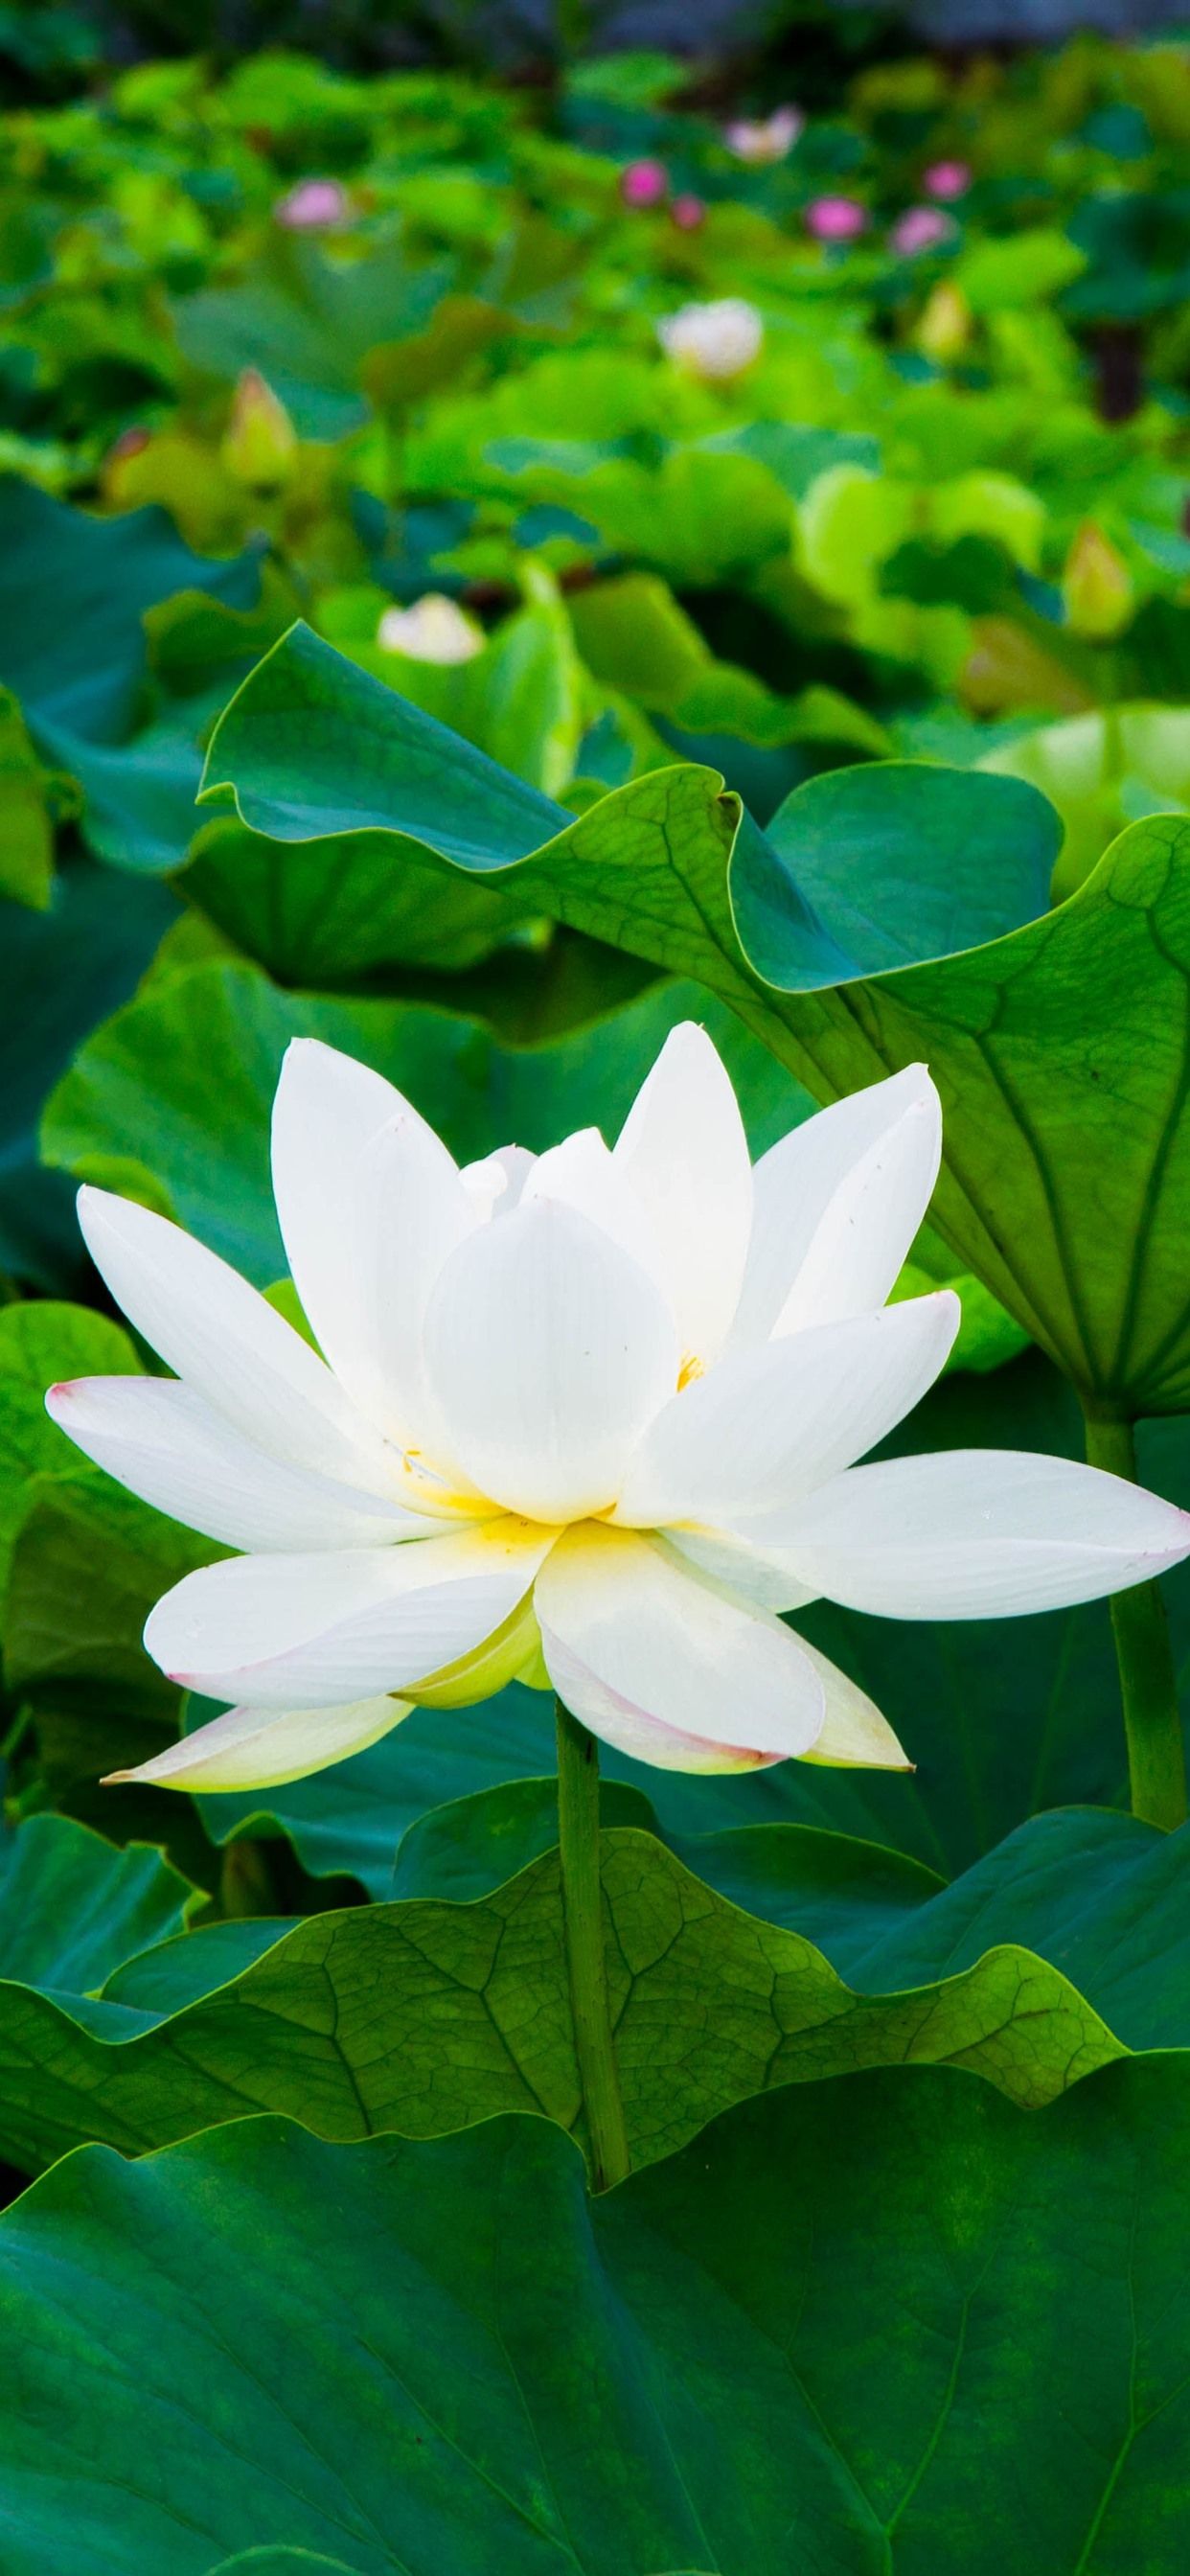 White Lotus, Green Leaves, Flowers 1242x2688 IPhone 11 Pro XS Max